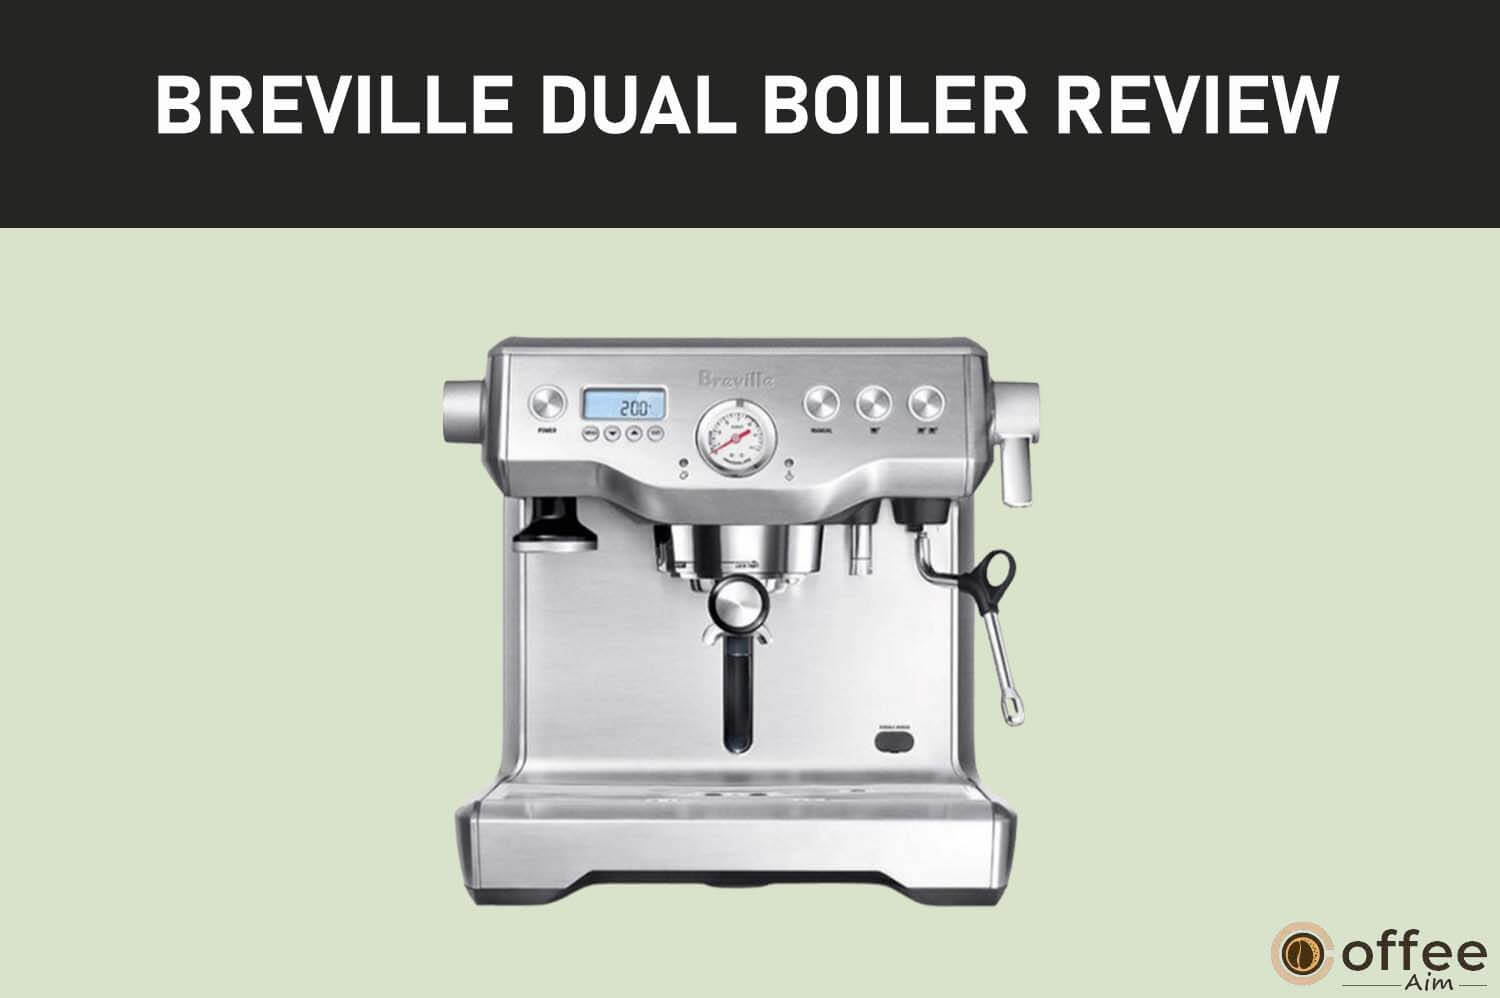 Featured image for the article "Breville Dual Boiler Review"